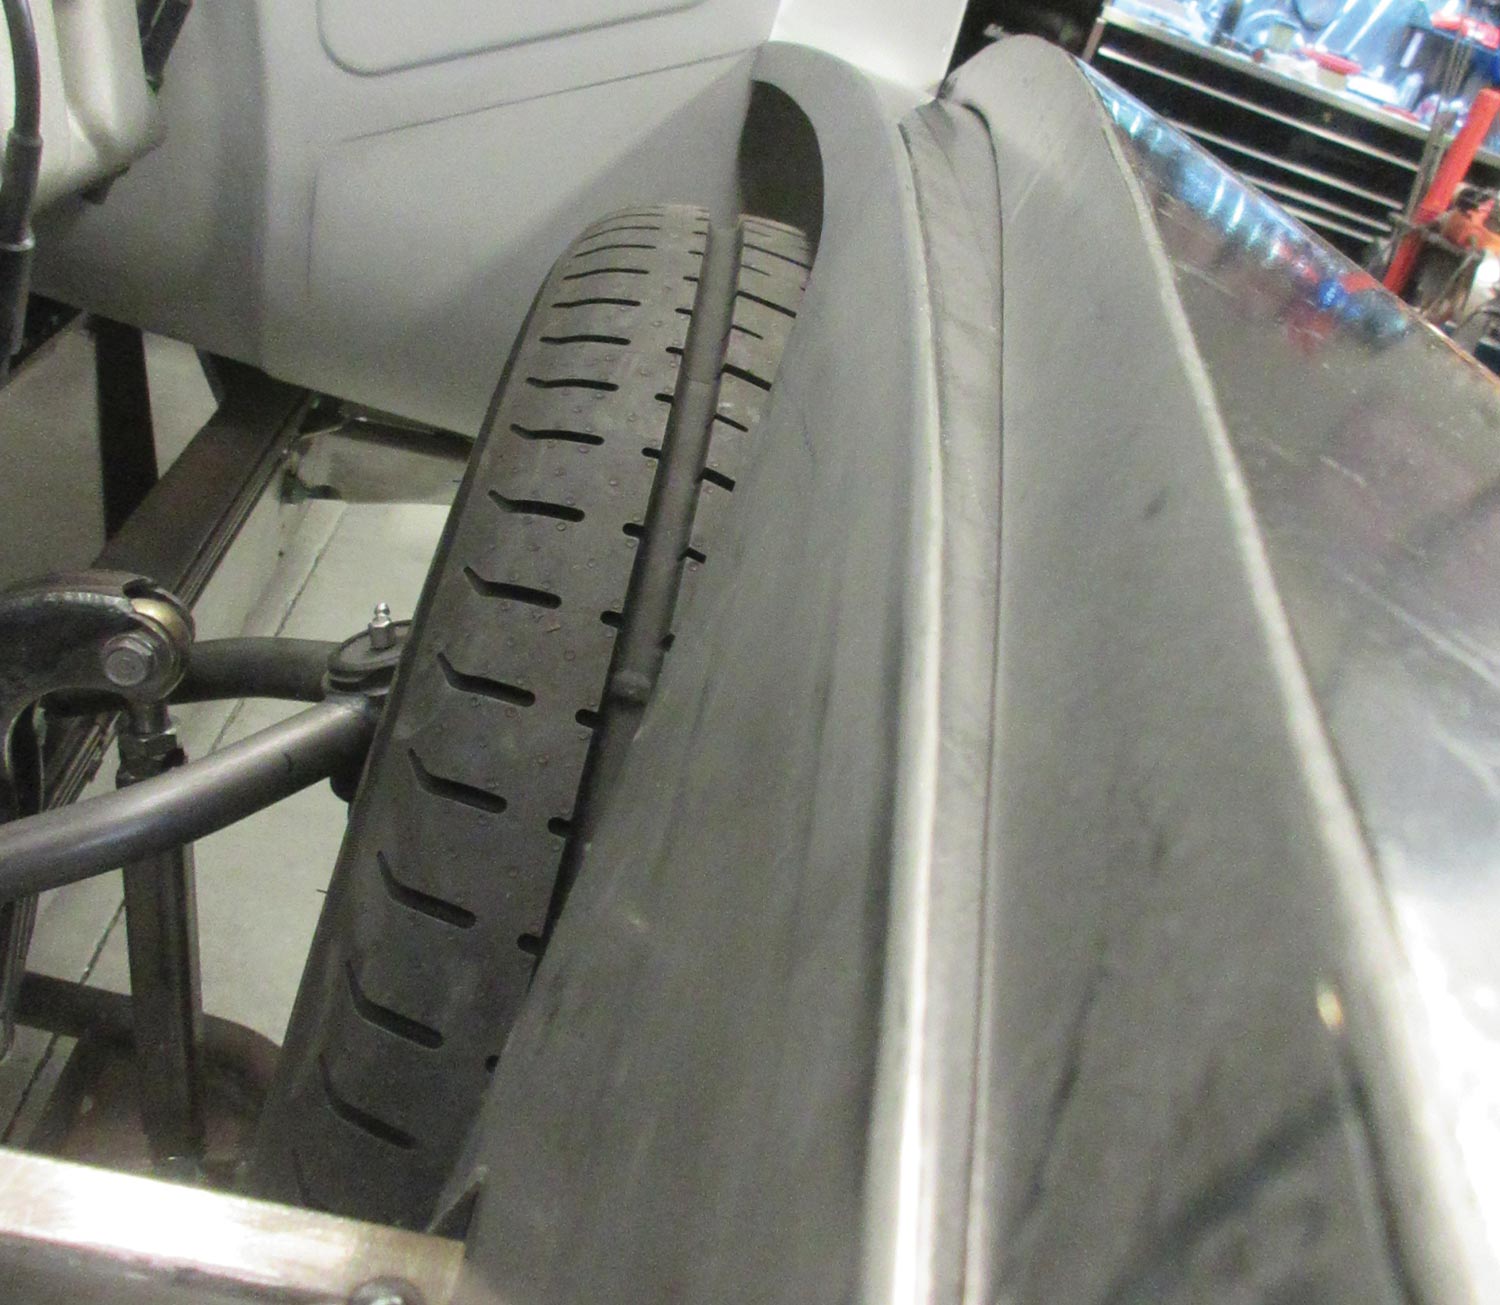 view along the fender area above the tire, the panel sits in place